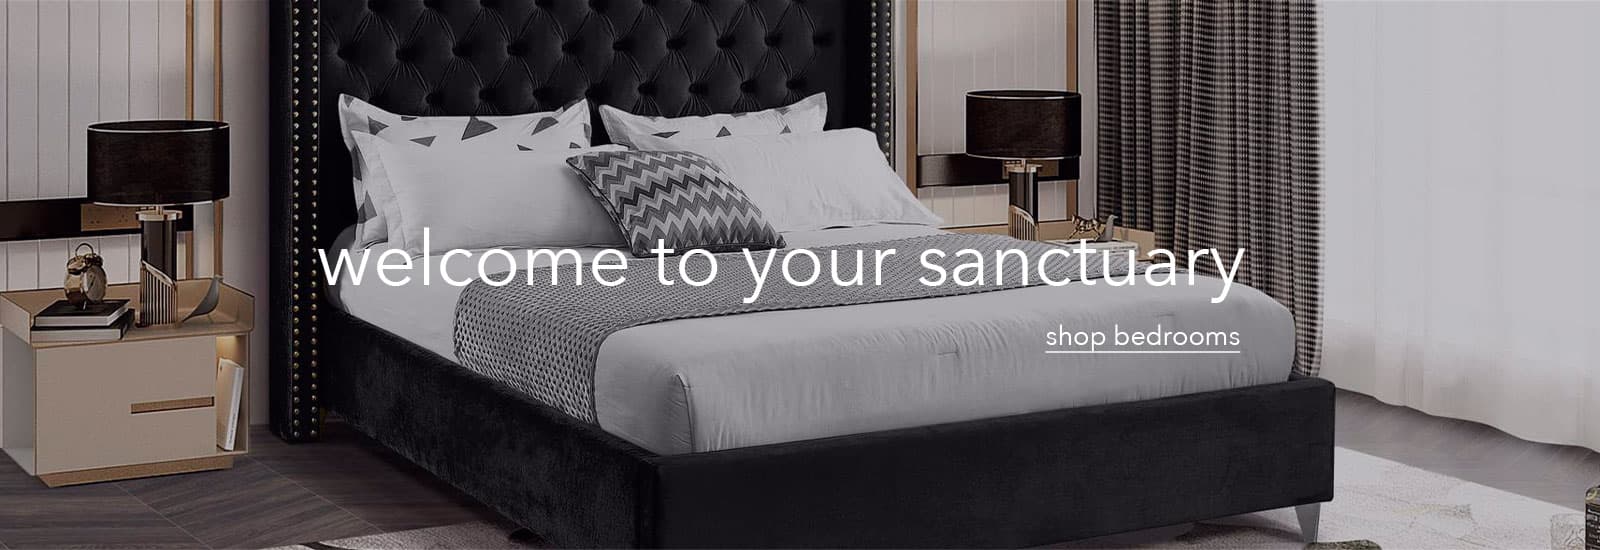 Welcome to your Sanctuary Shop Bedrooms